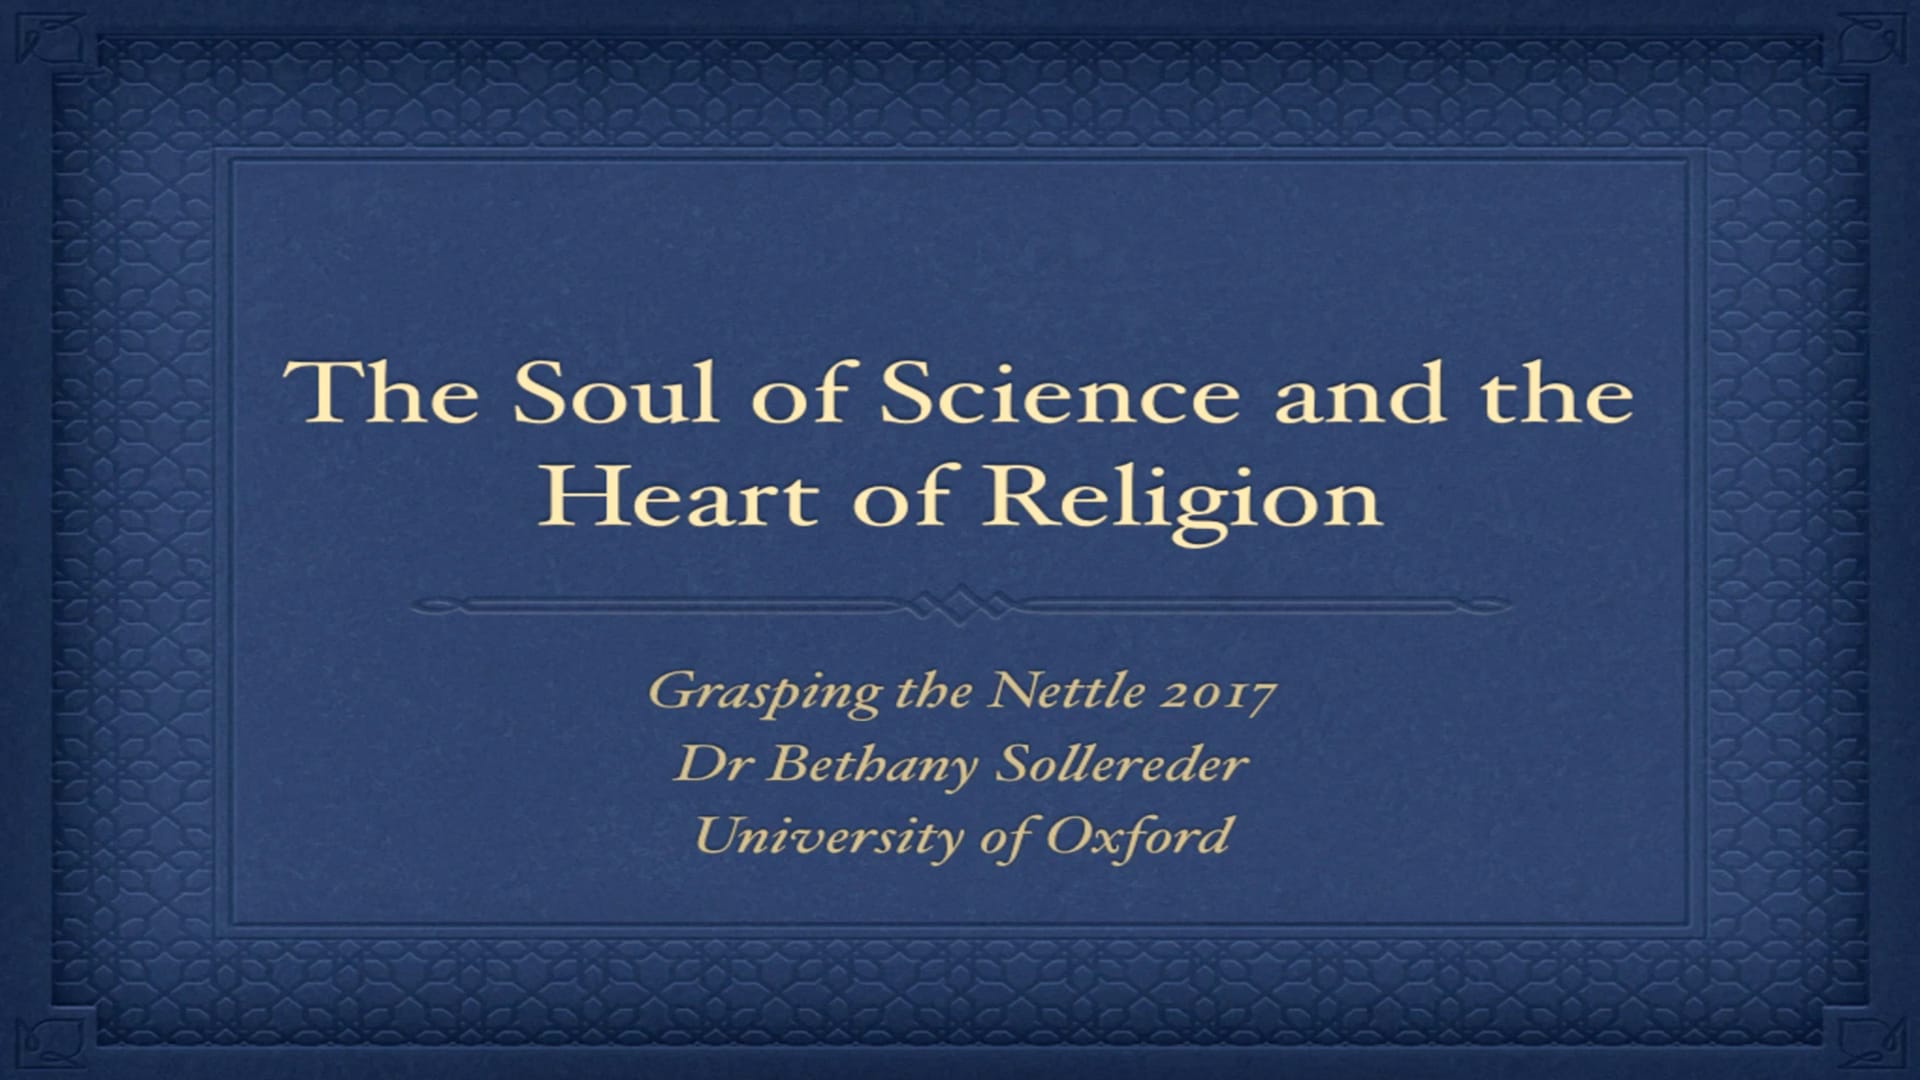 The Soul of Science and the Heart of Religion